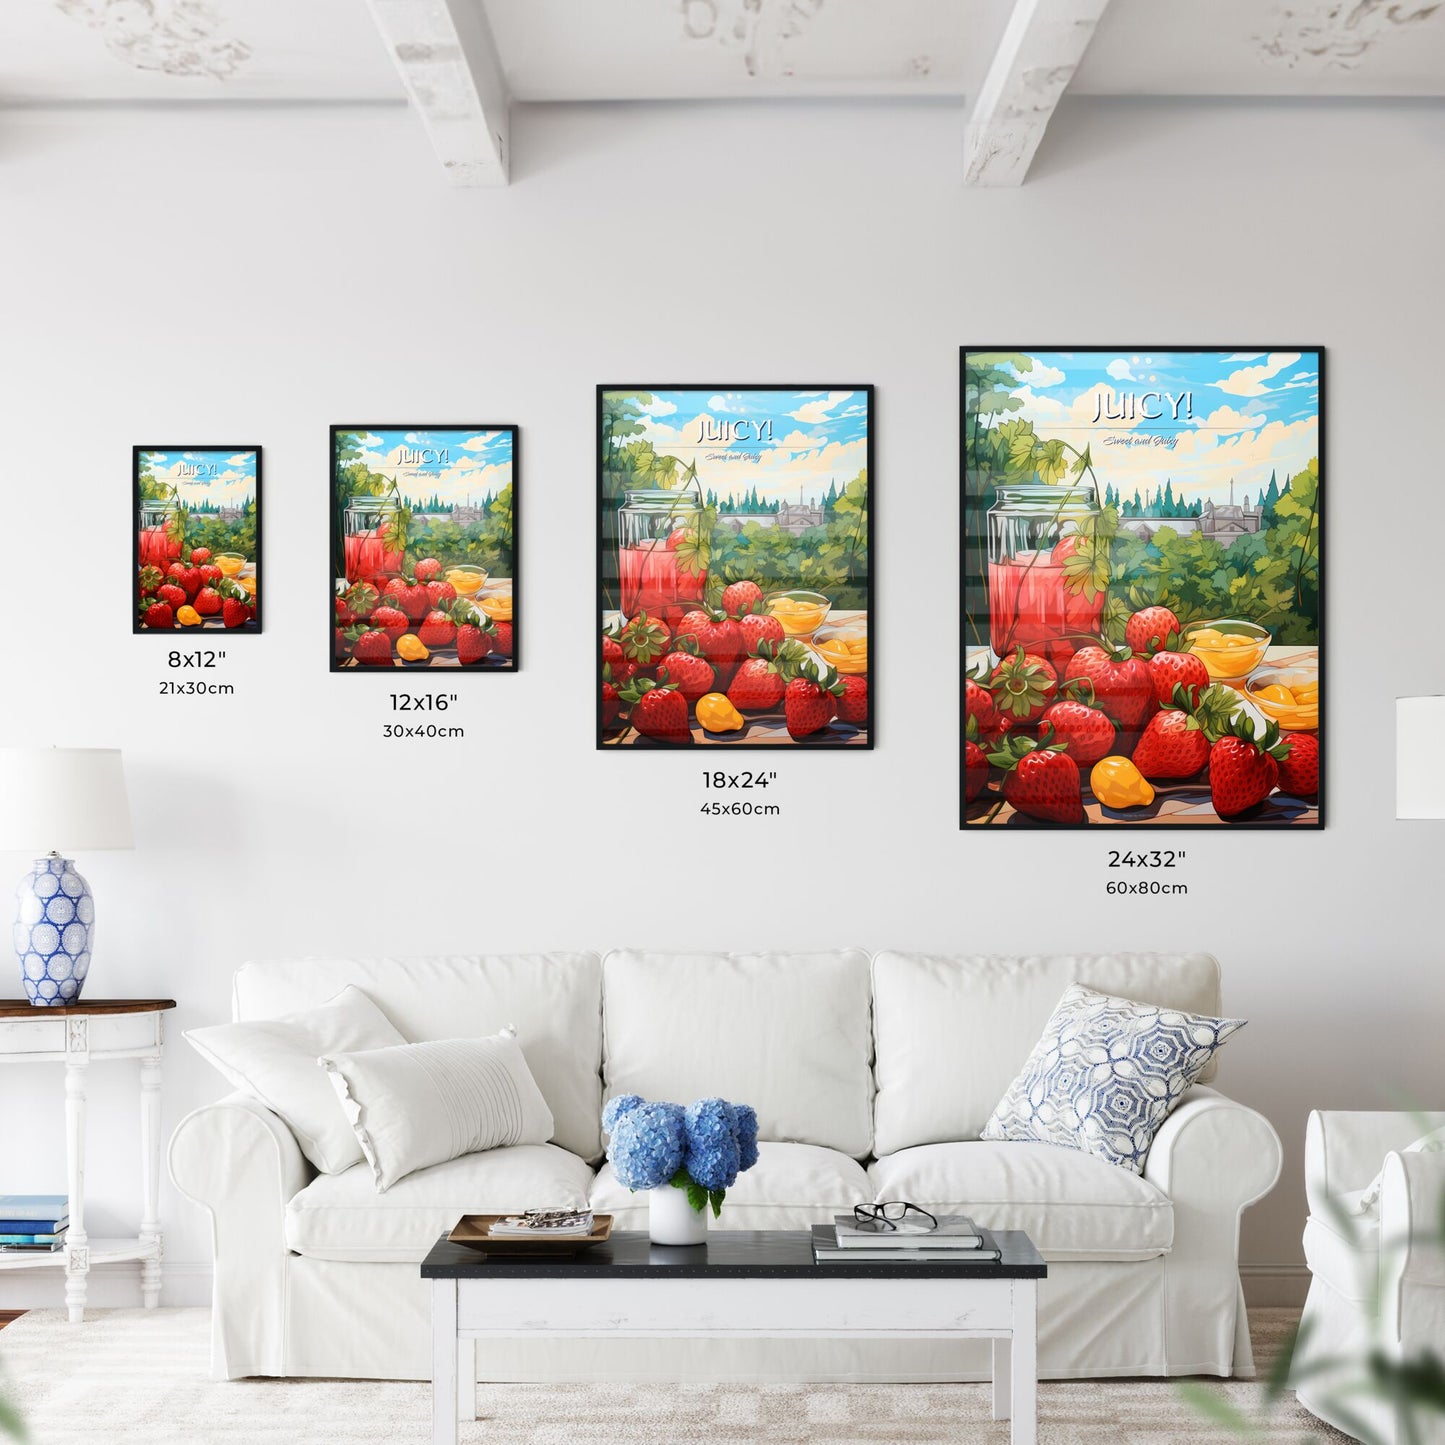 Painting Of Strawberries And A Glass Of Juice Art Print Default Title